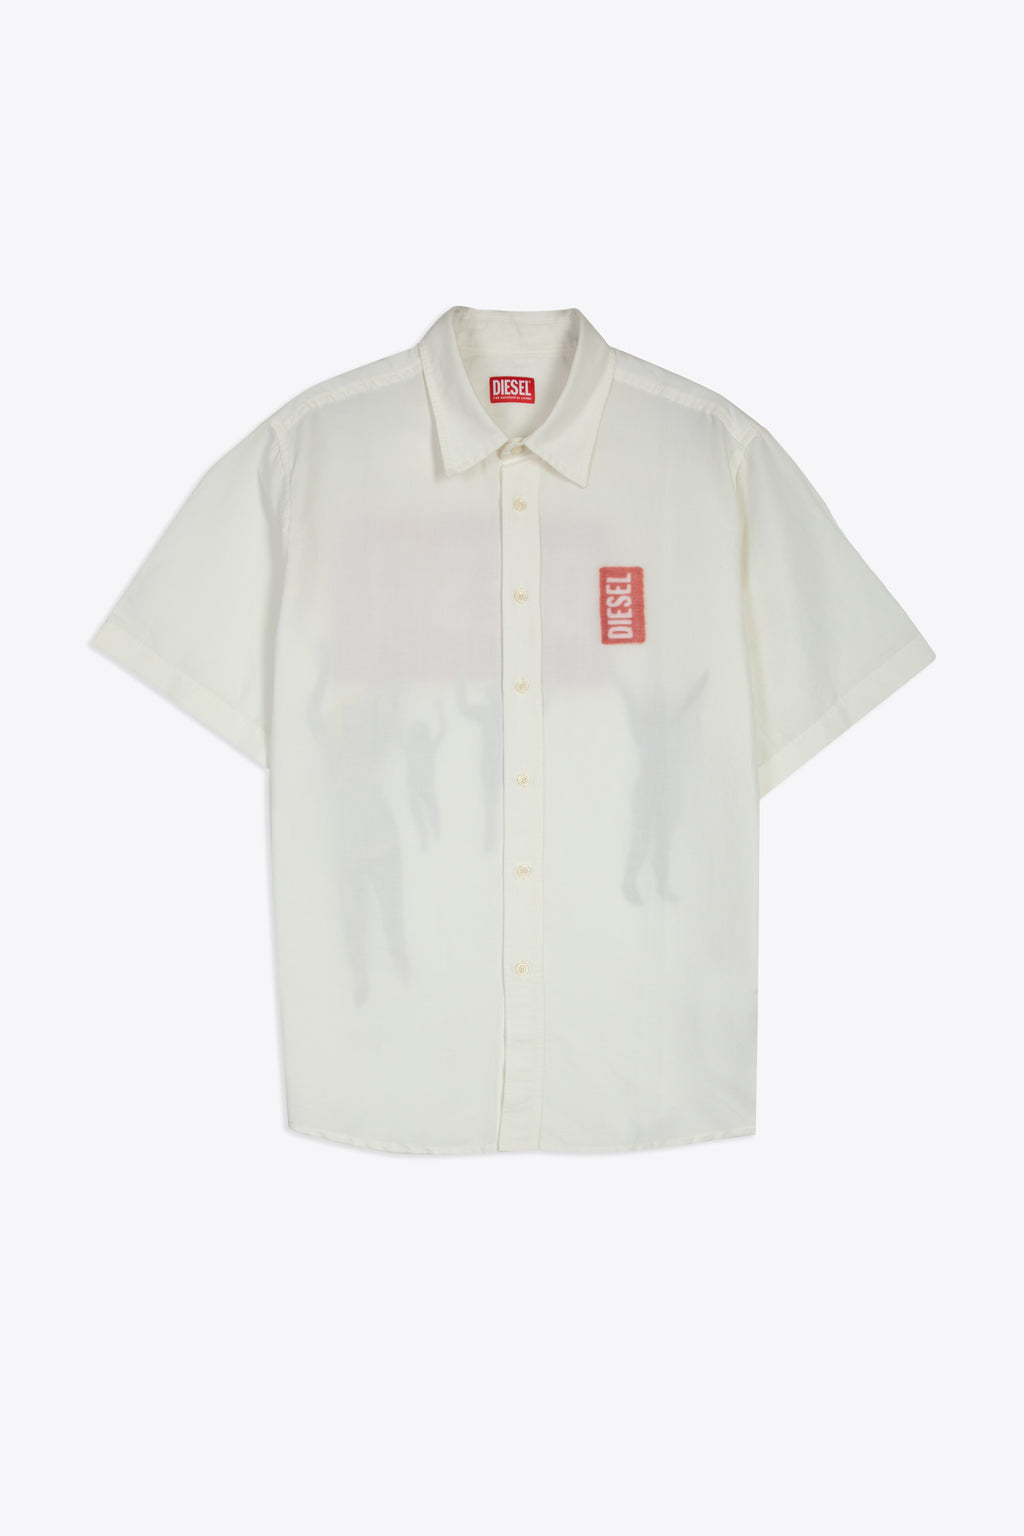 alt-image__White-linen-blend-shirt-with-short-sleeves-and-digital-print---S-Elias-A
